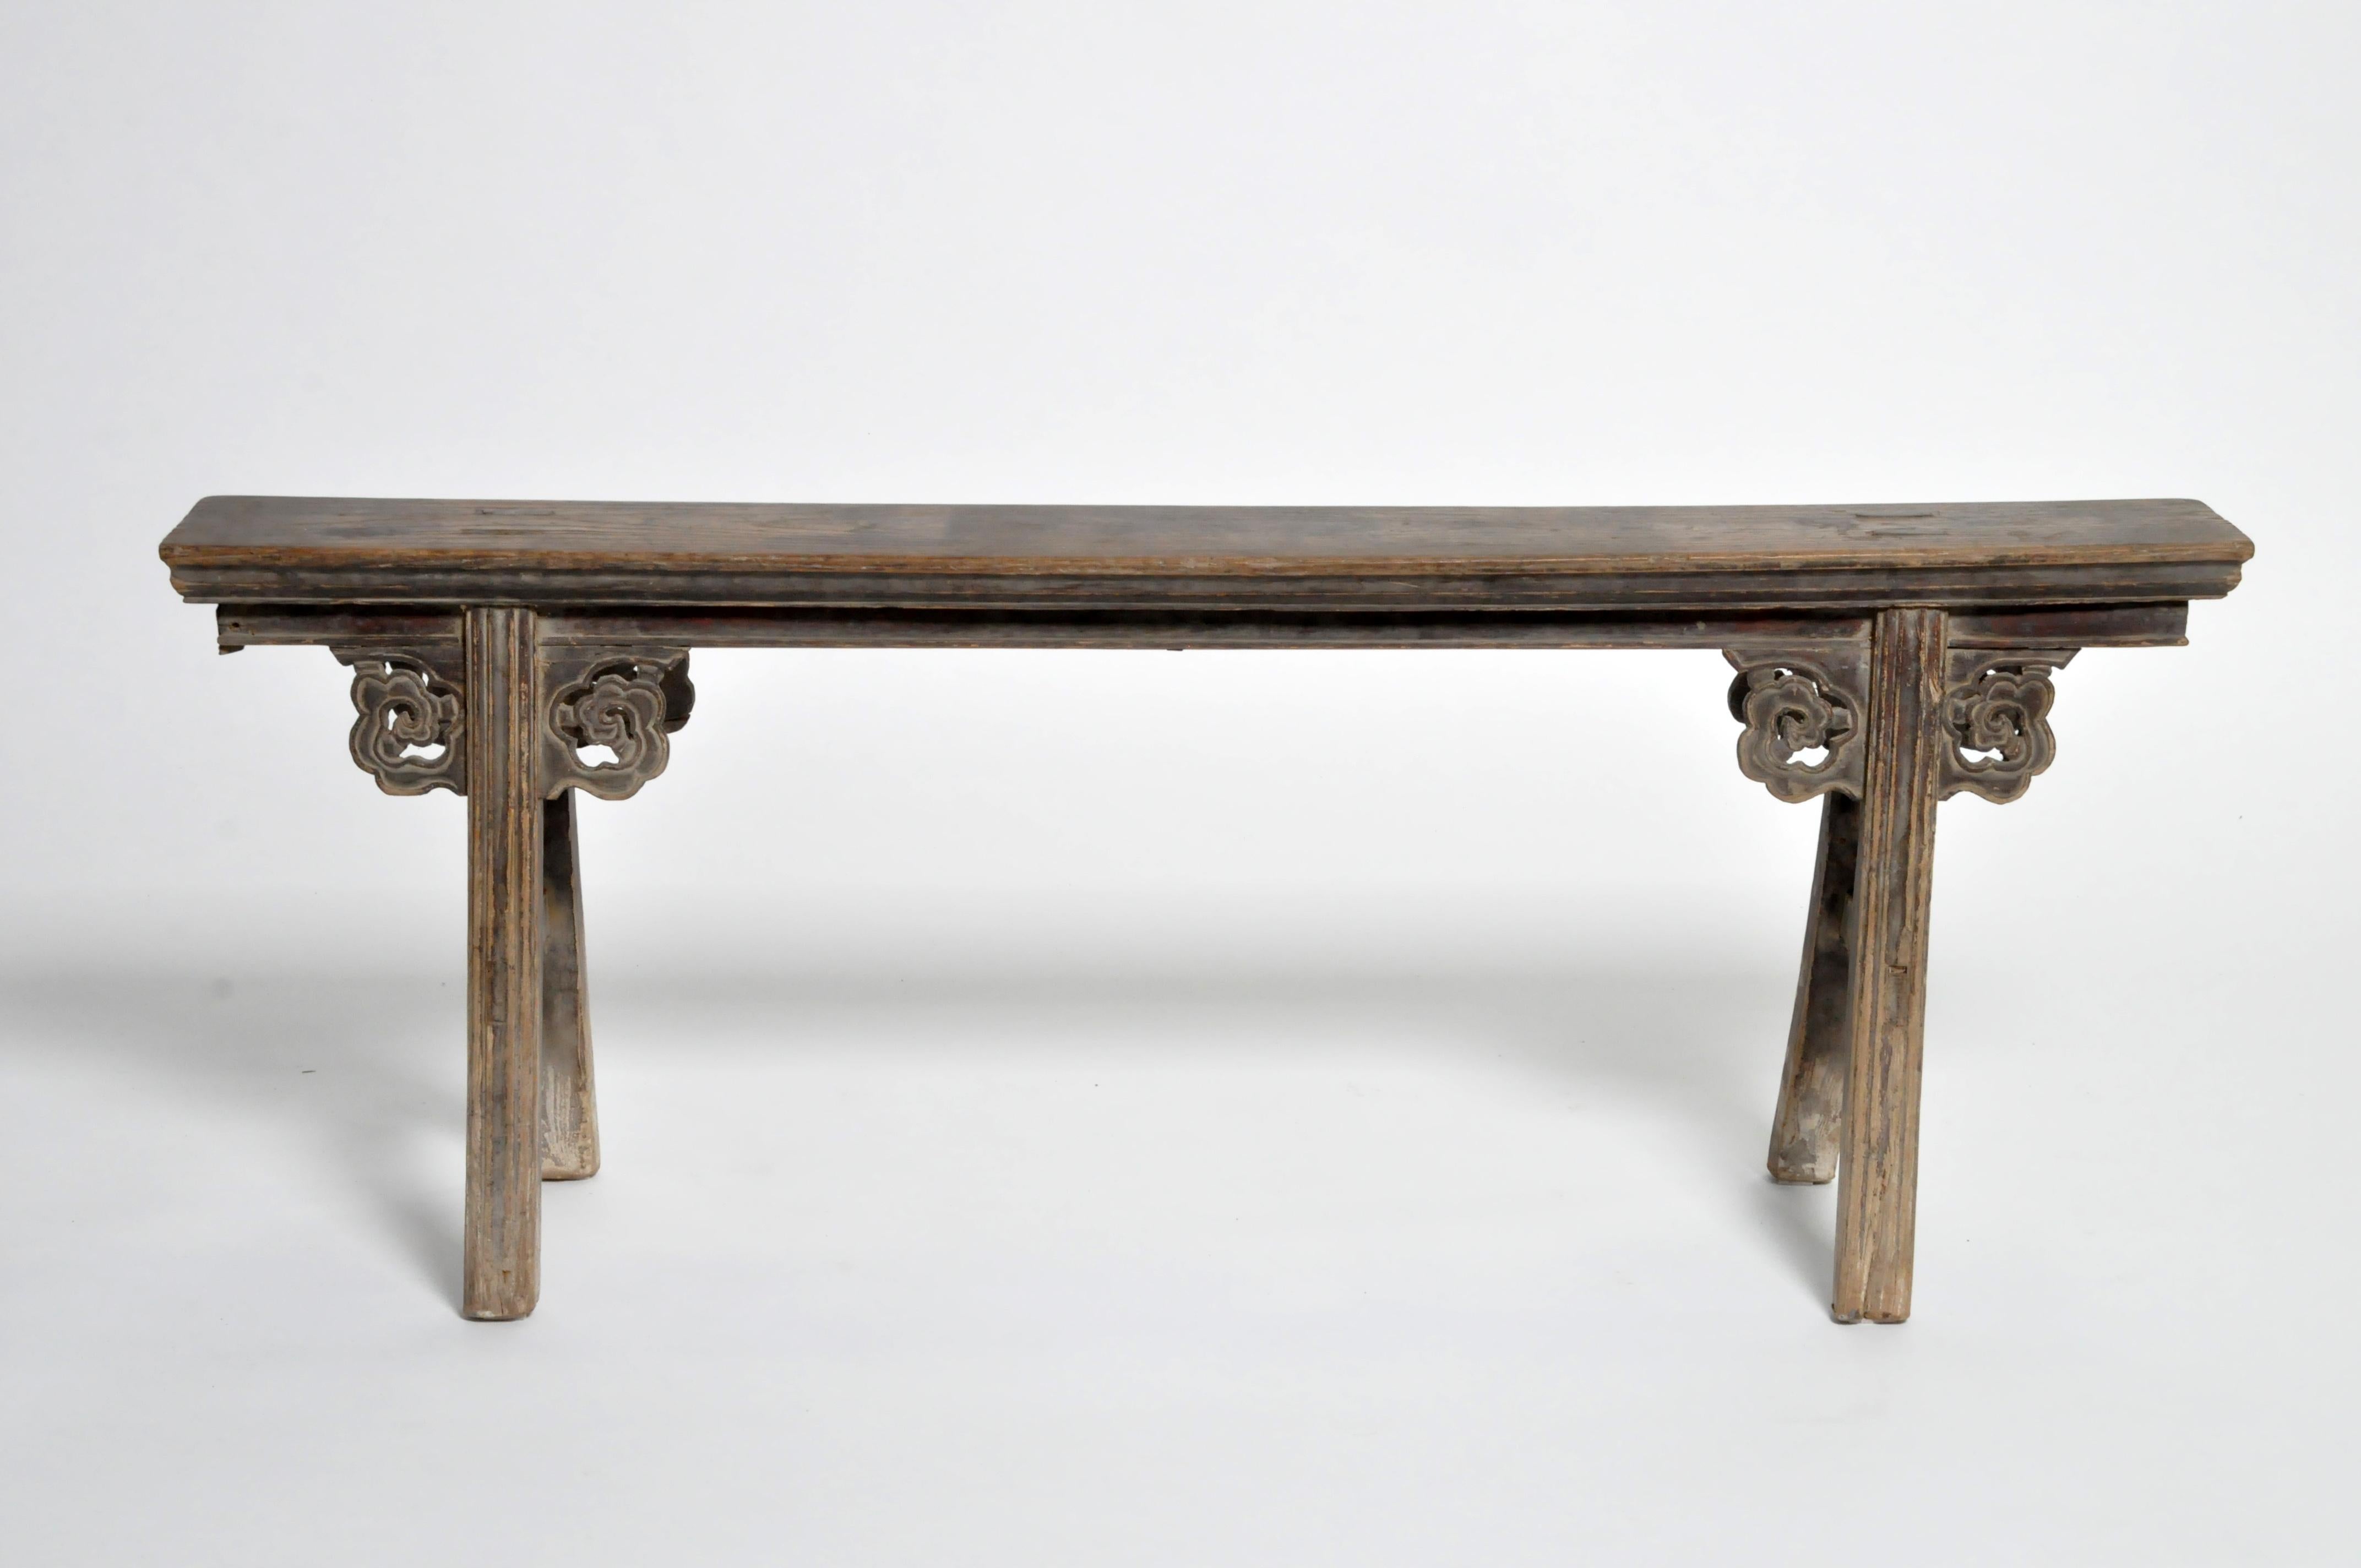 This classic two-person Chinese bench features stretchers, mortise and tenon joinery, and traces of original lacquer. It has a beautiful aged, all-original patina.